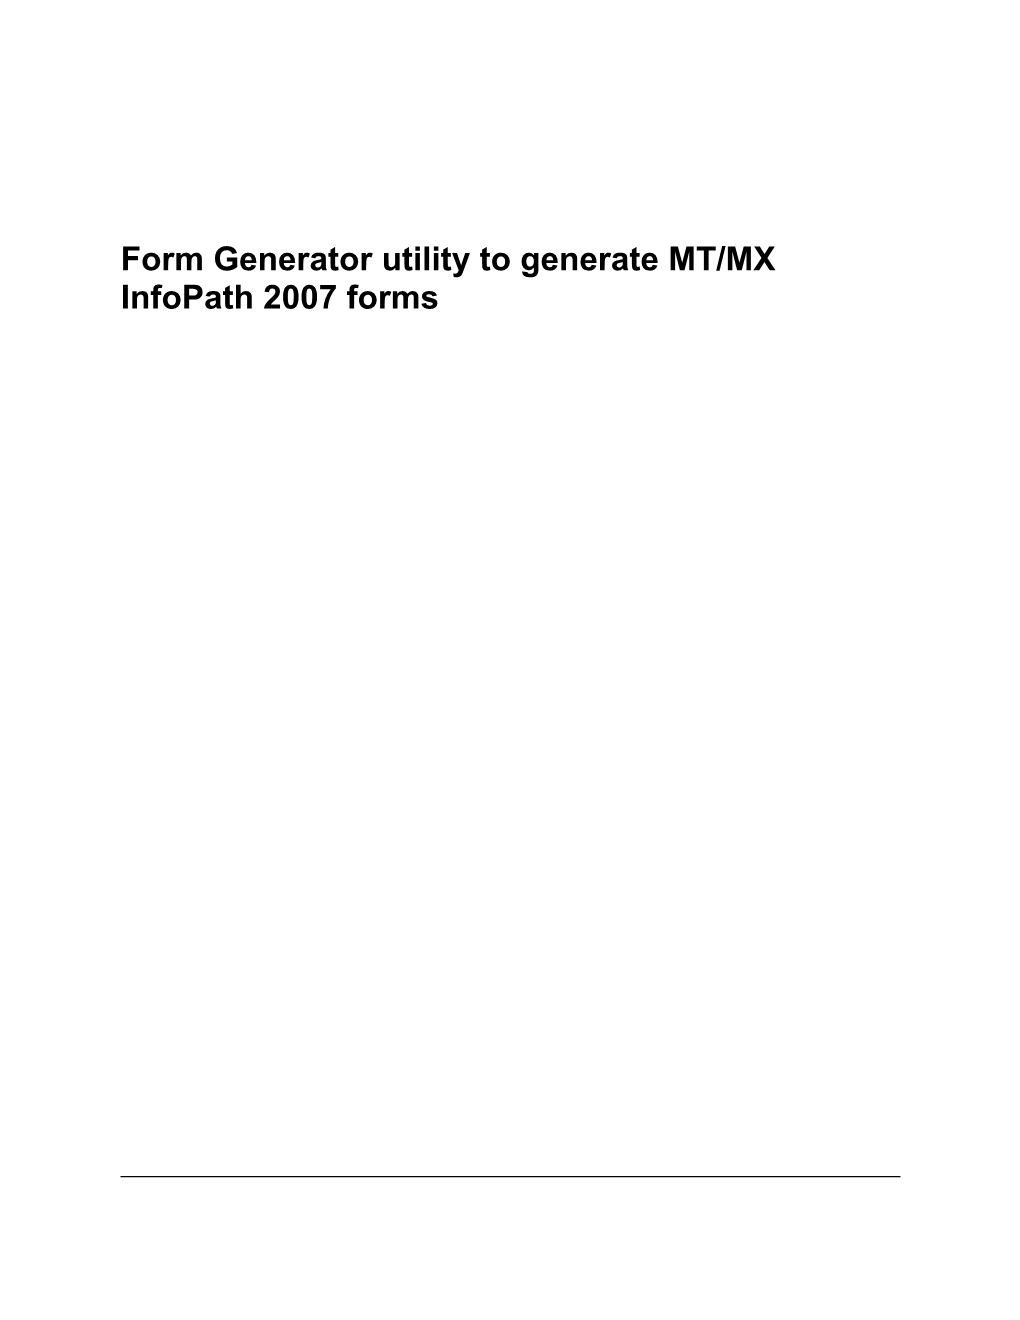 Form Generator Utility to Generate MT/MX Infopath 2007 Forms